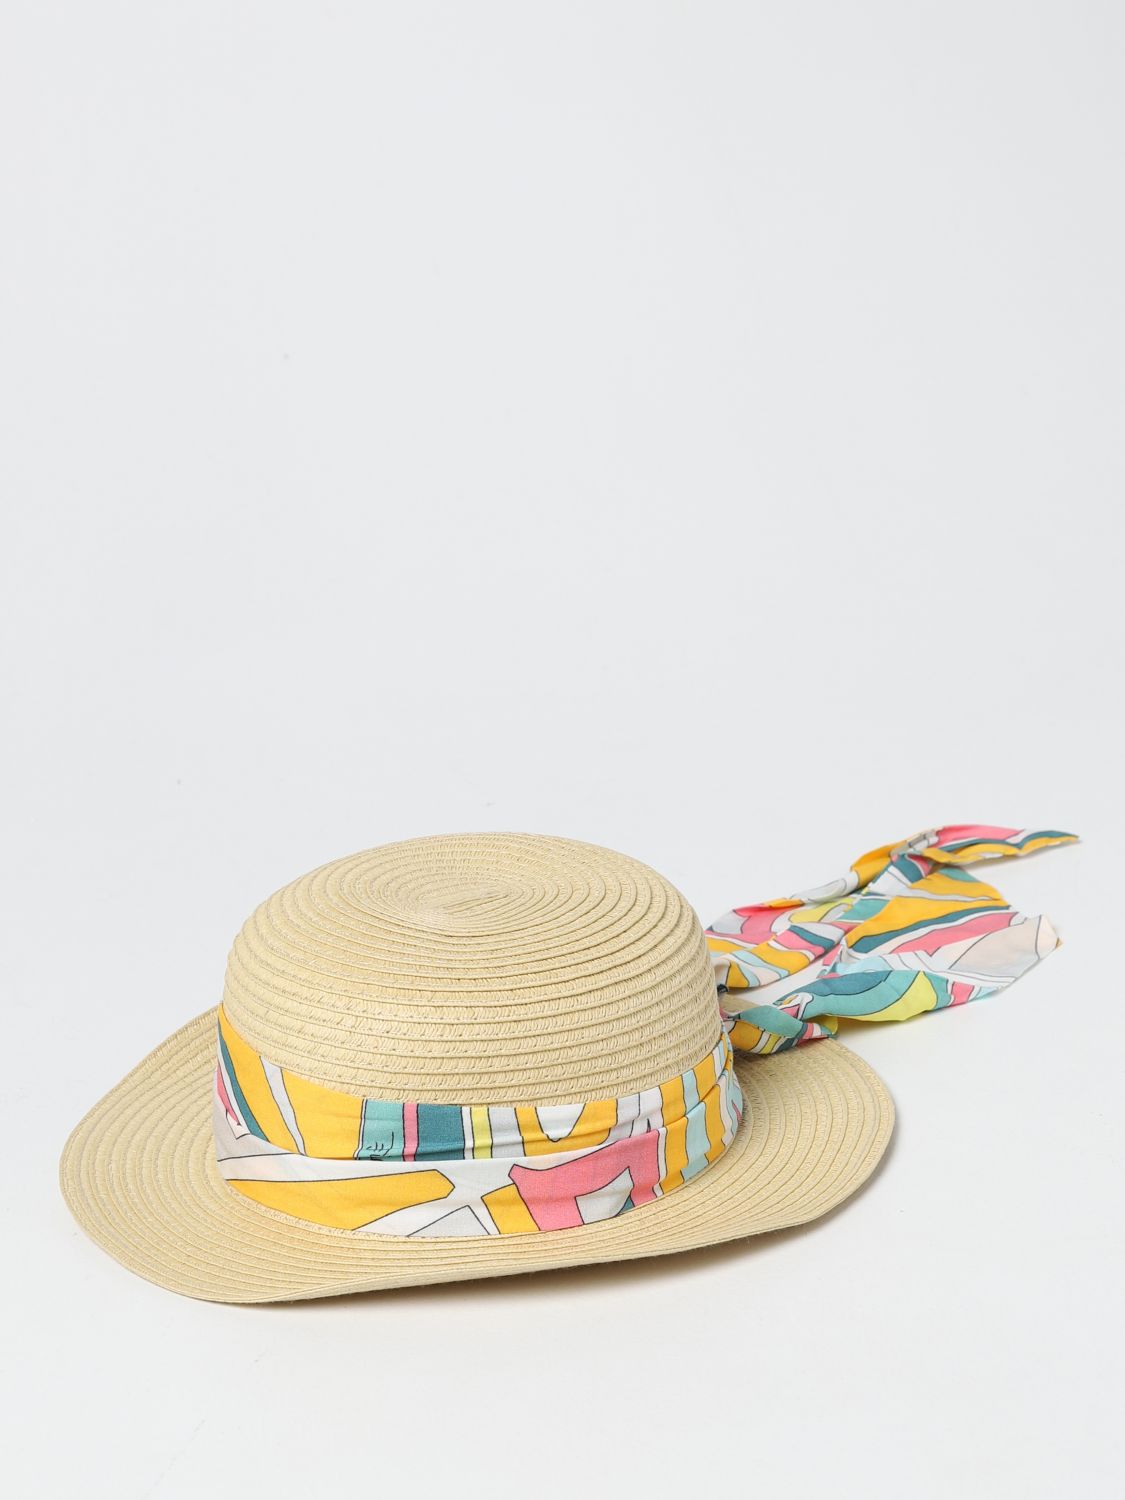 Girls' hats Emilio Pucci: Emilio Pucci hat with printed ribbon green 1